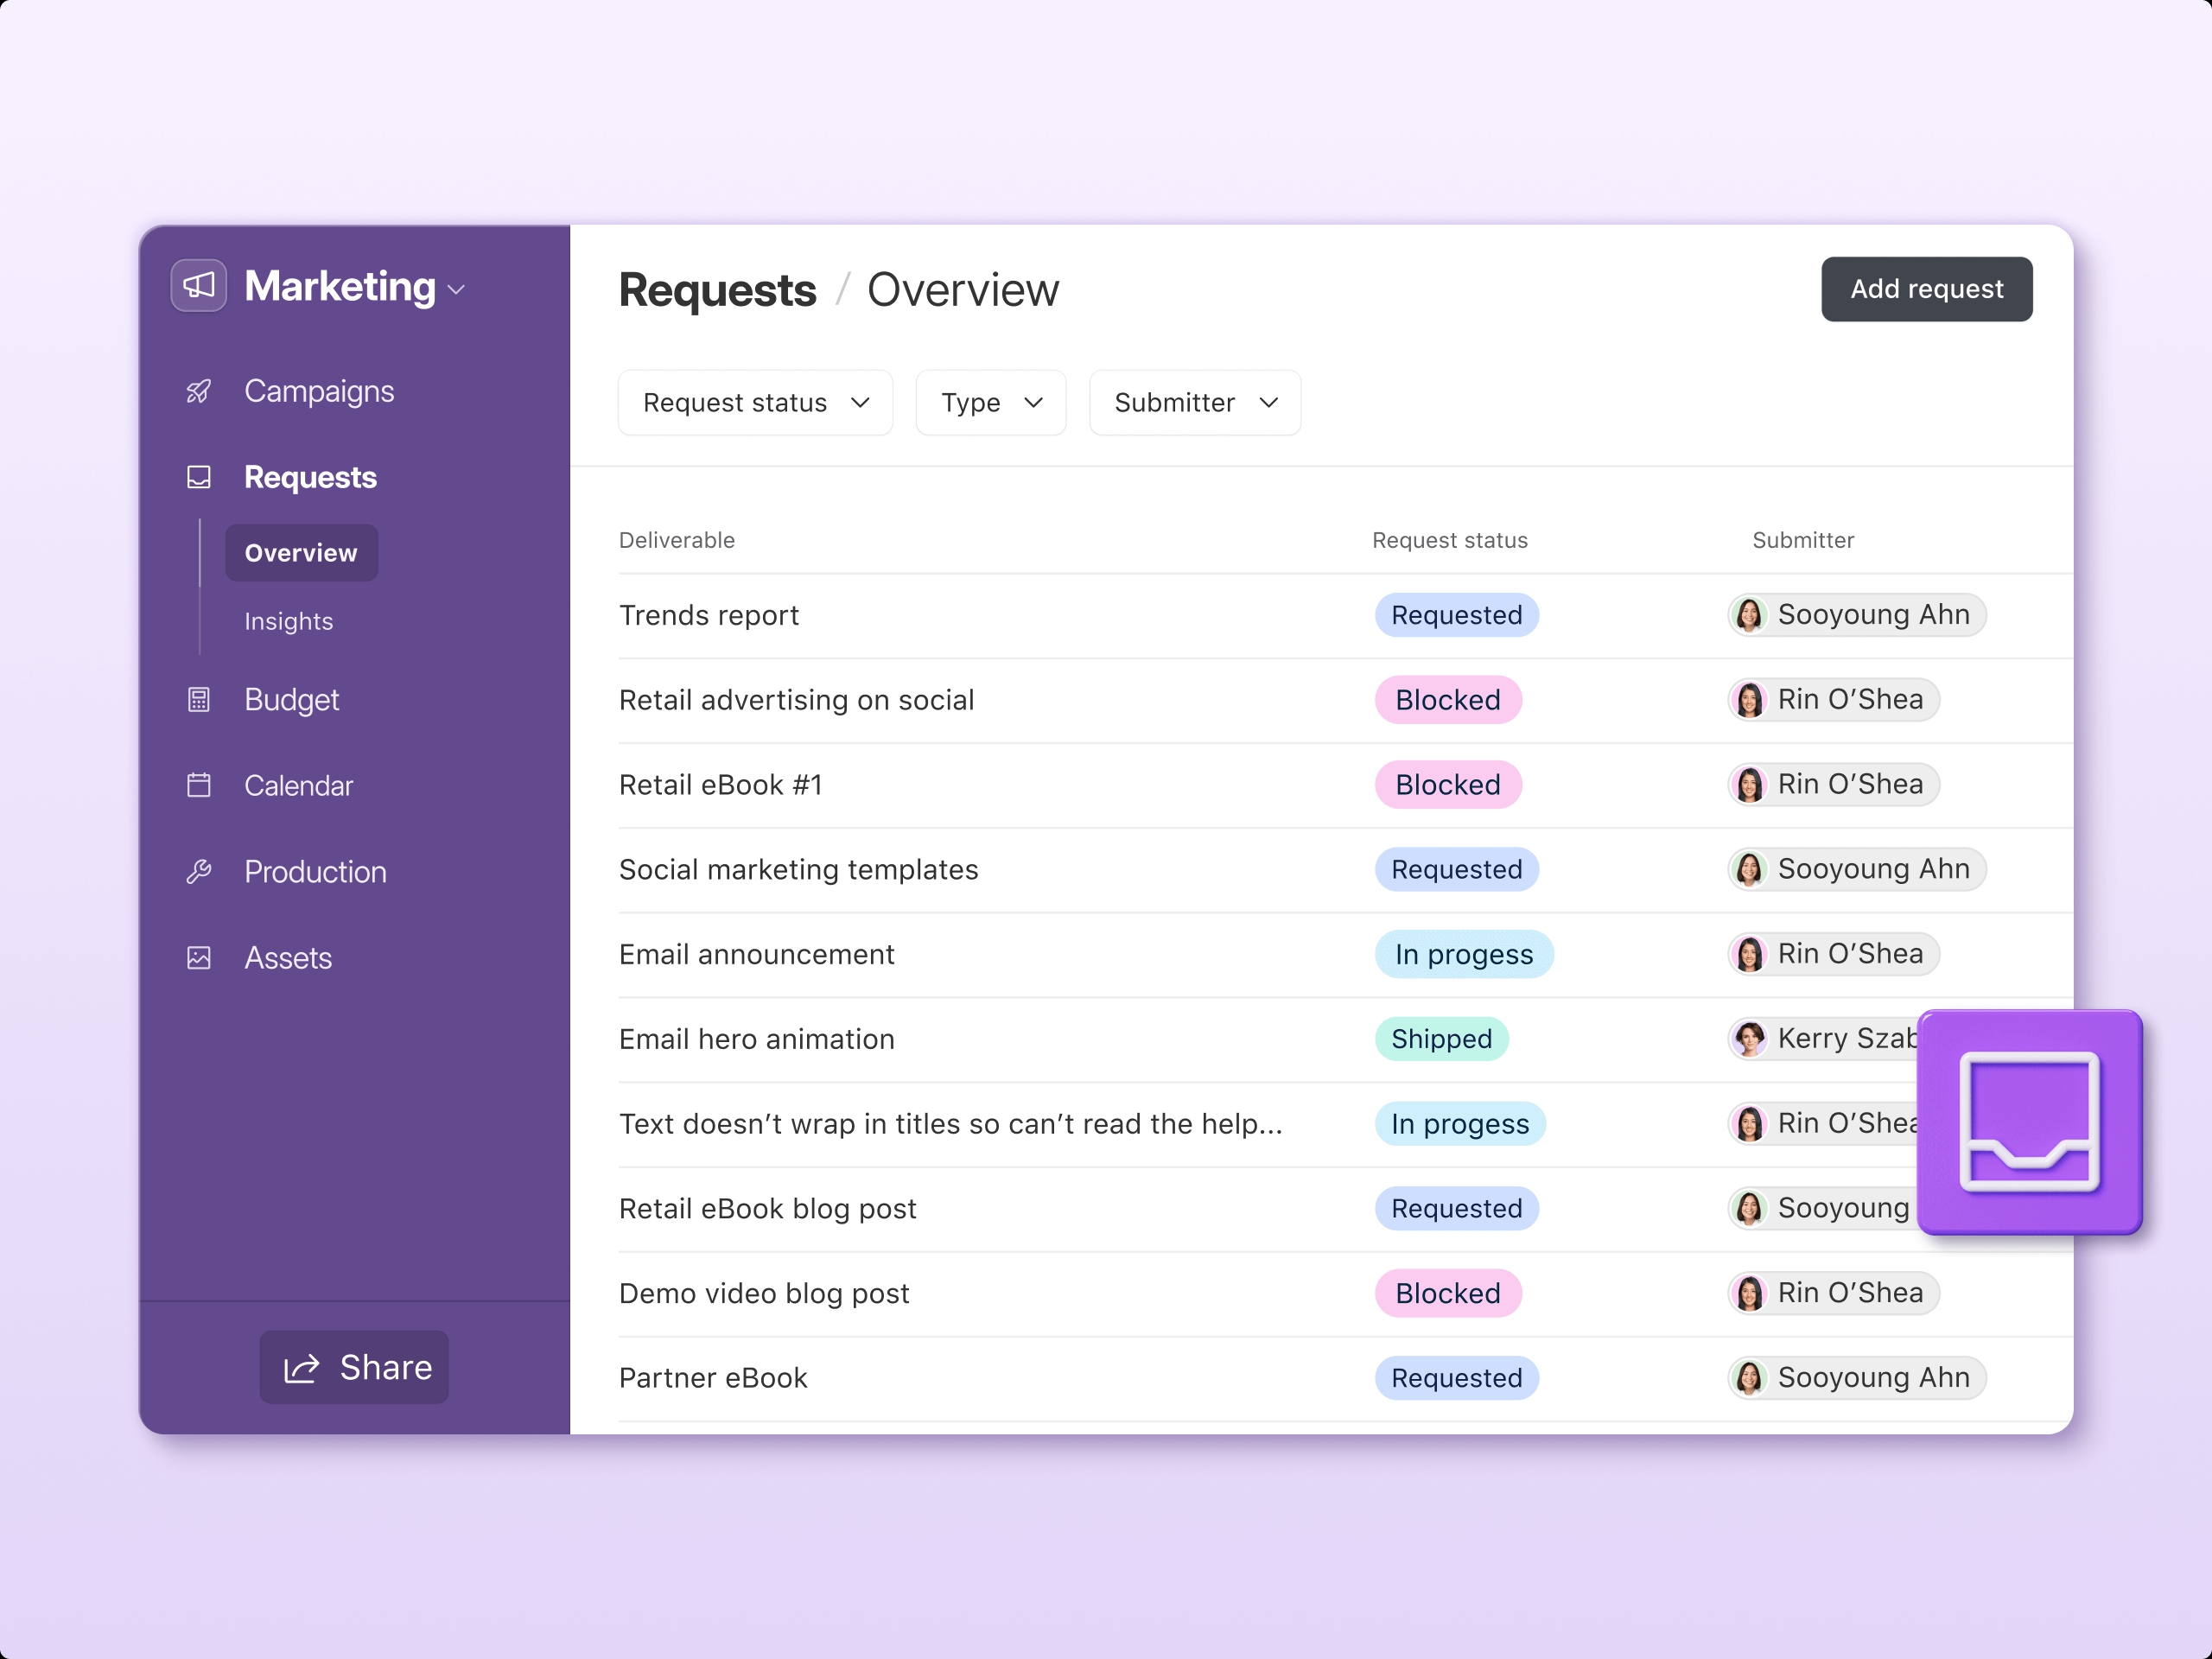 The marketing request app by Airtable shows list of deliverables, their status, and submitter